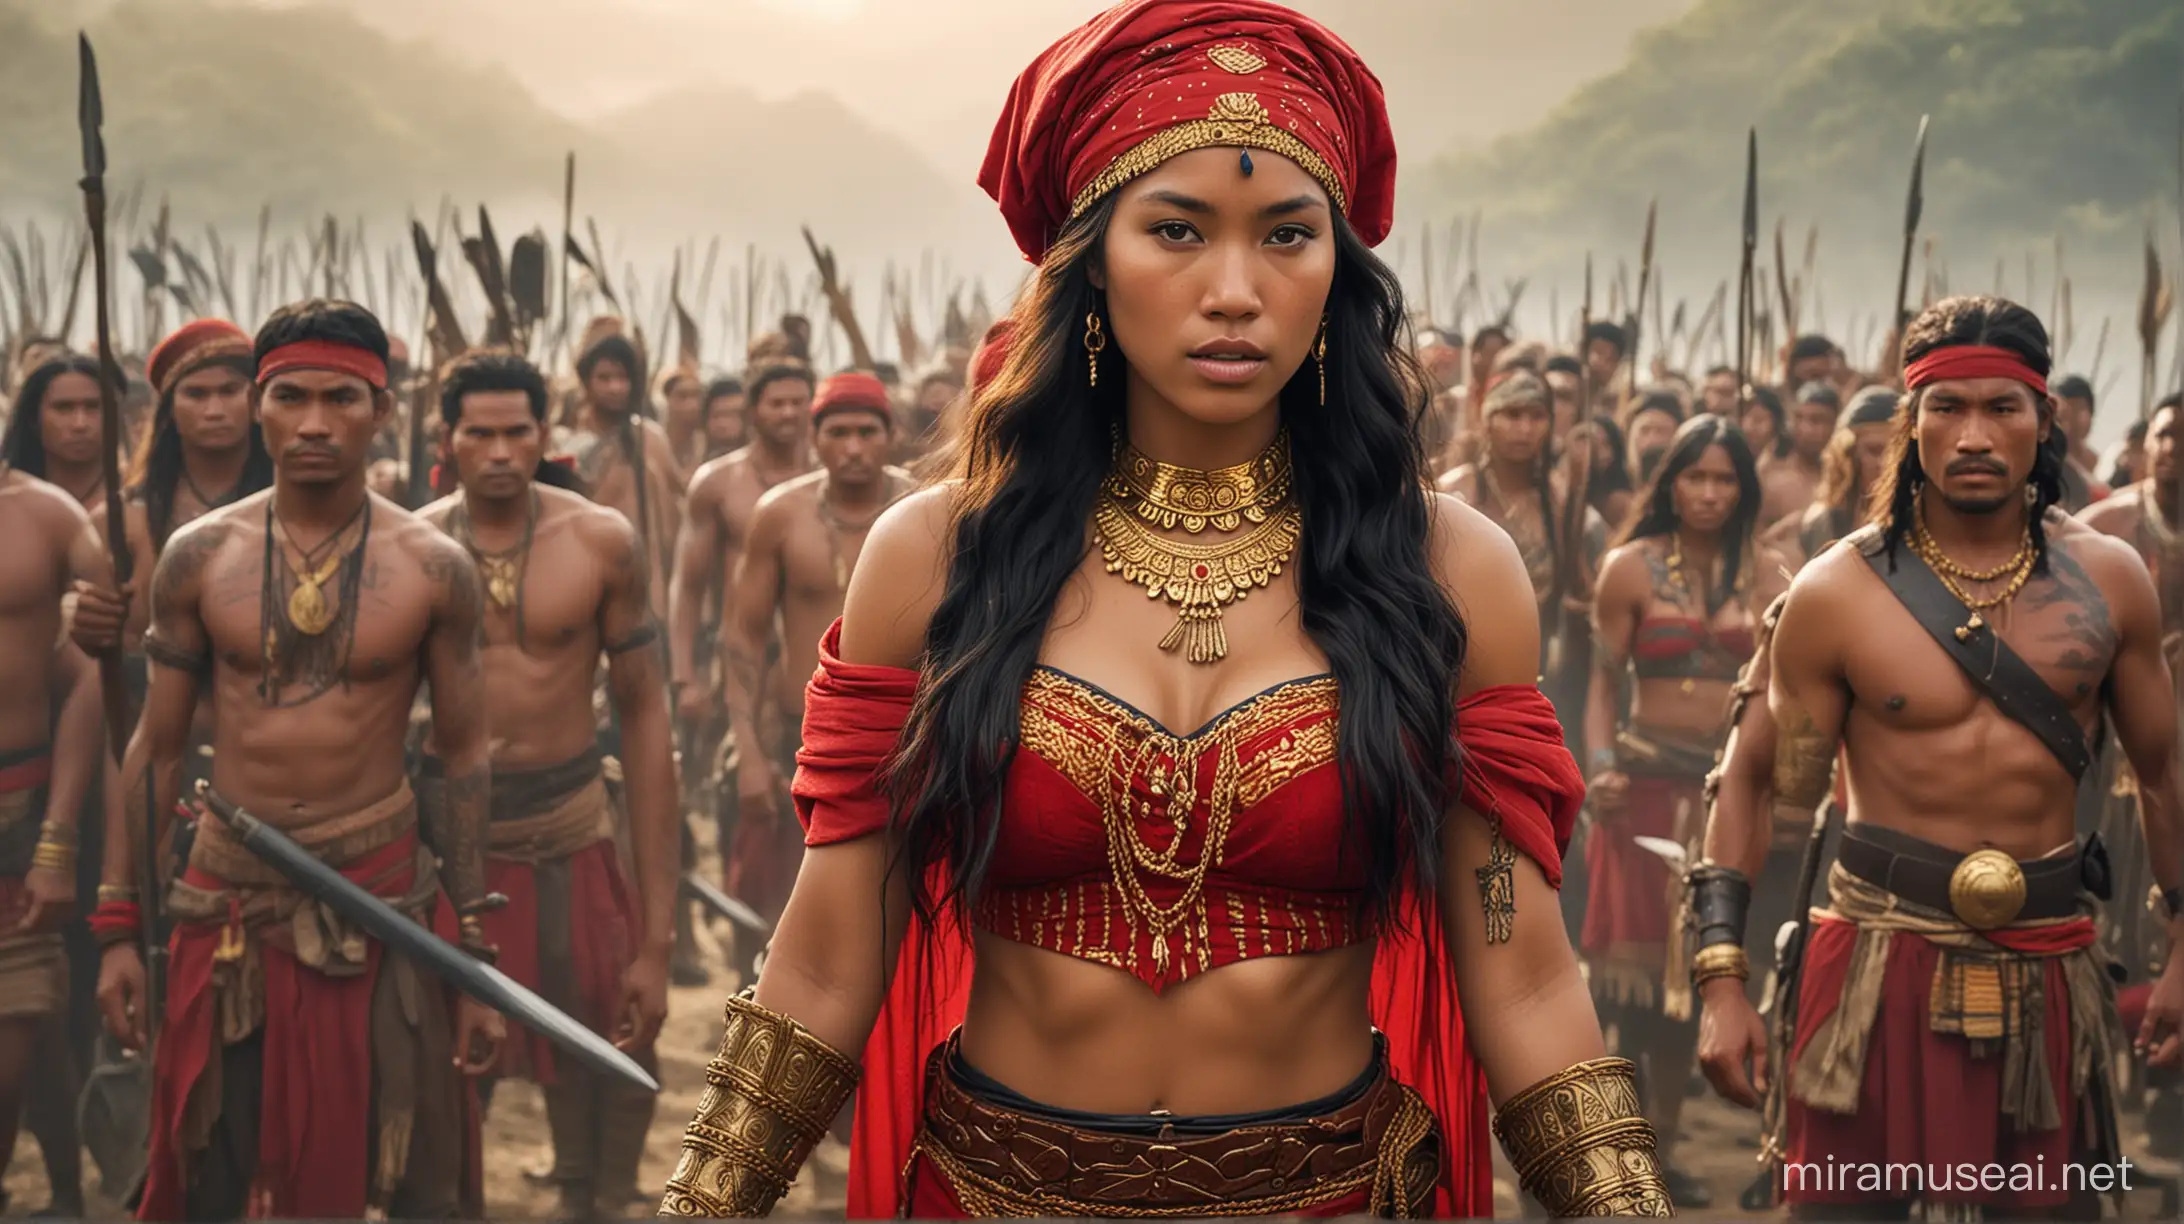 A strong precolonial warrior Filipina with long wavy black hair and wearing a red headwrap, red loincloth, and red chest wrap with gold ethnic woven patterns, she also wears ethnic gold belt, arm cuffs, bracelets and other gold jewelry, her entire body is covered in zigzagging tribal tattoos, she defends a group of poor precolonial Filipino natives against the tall and angry 16th century Spanish colonizers. 